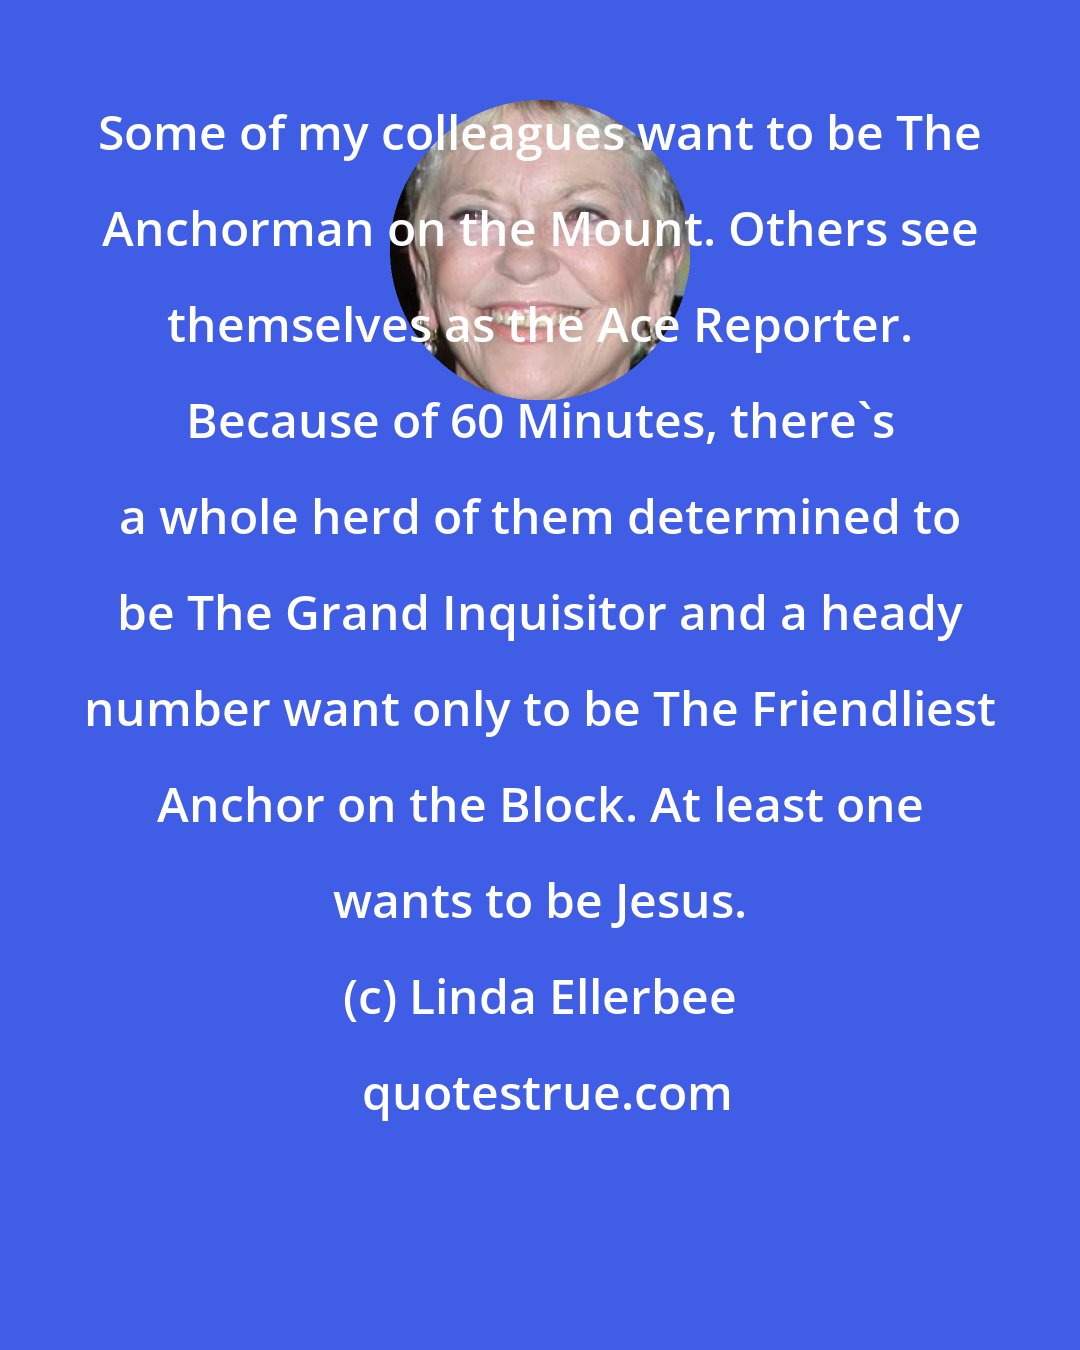 Linda Ellerbee: Some of my colleagues want to be The Anchorman on the Mount. Others see themselves as the Ace Reporter. Because of 60 Minutes, there's a whole herd of them determined to be The Grand Inquisitor and a heady number want only to be The Friendliest Anchor on the Block. At least one wants to be Jesus.